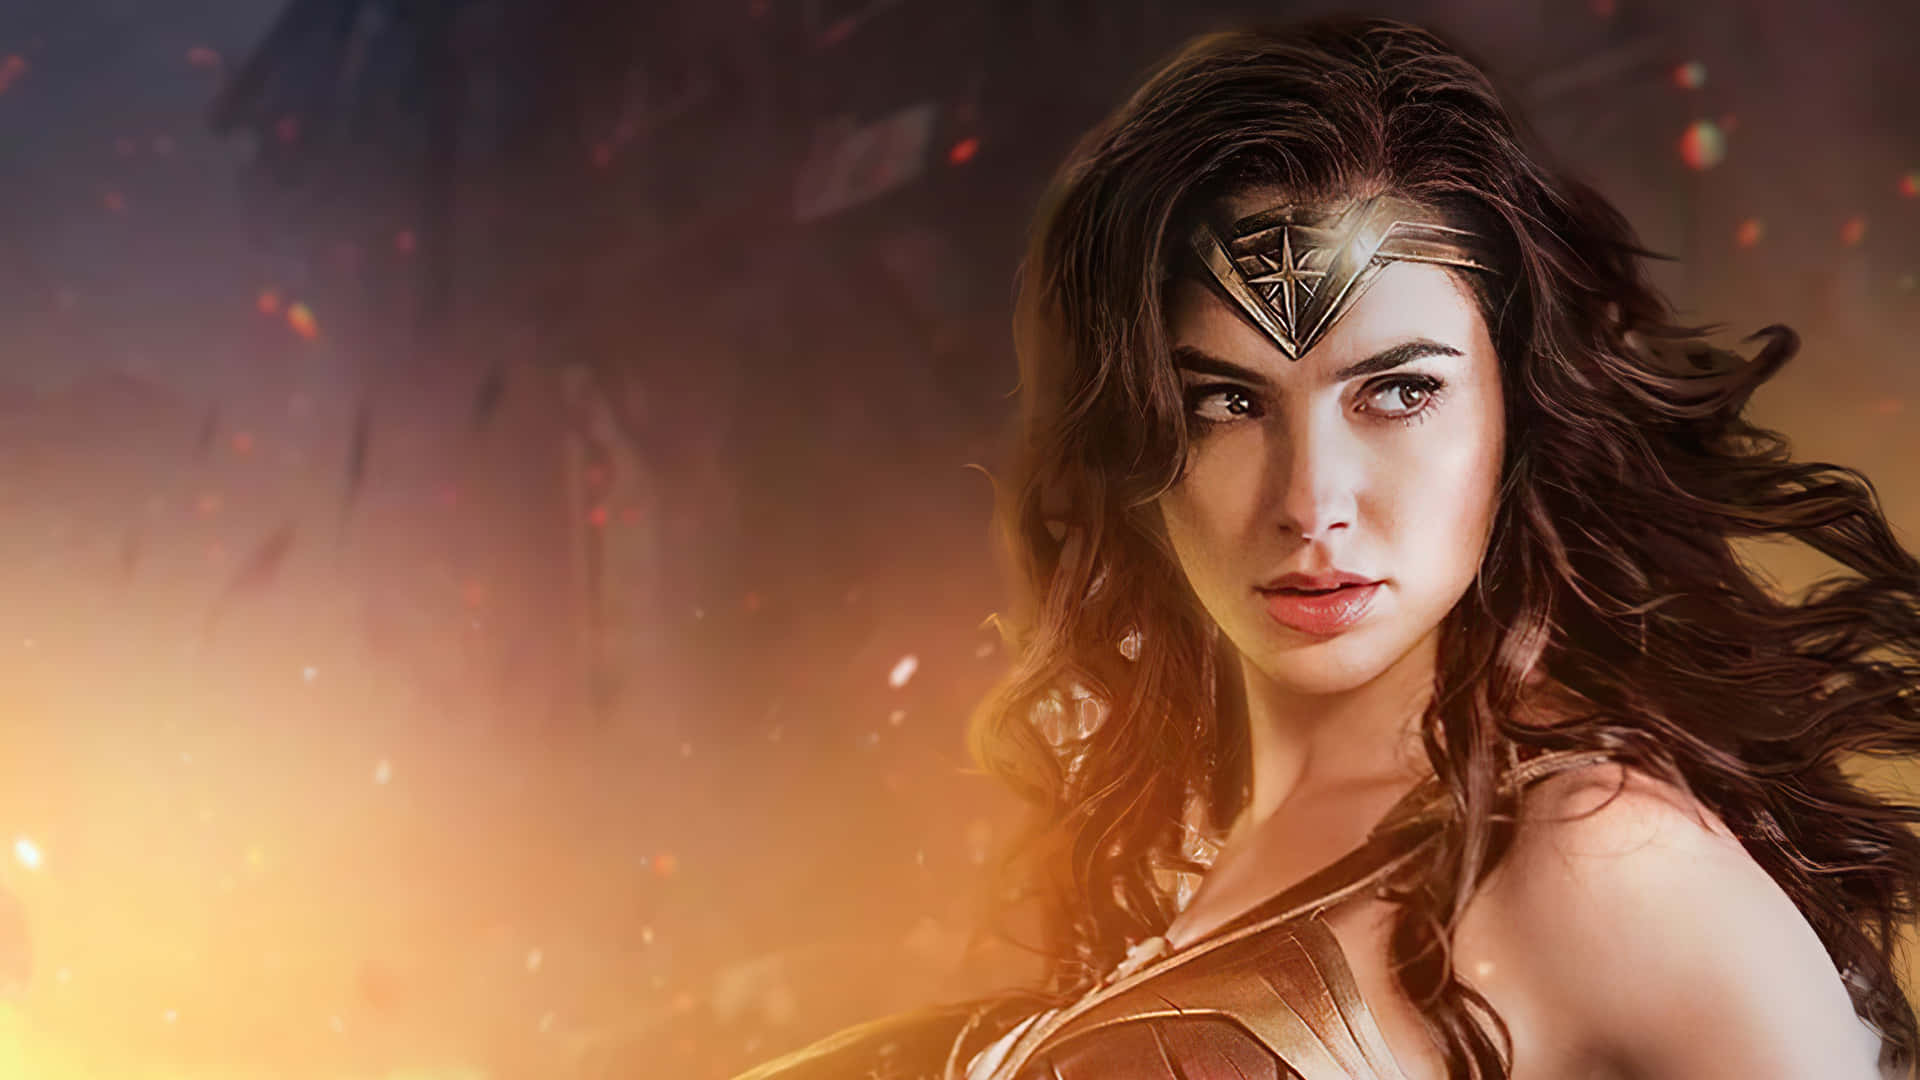 Wonder Woman is ready to save the world